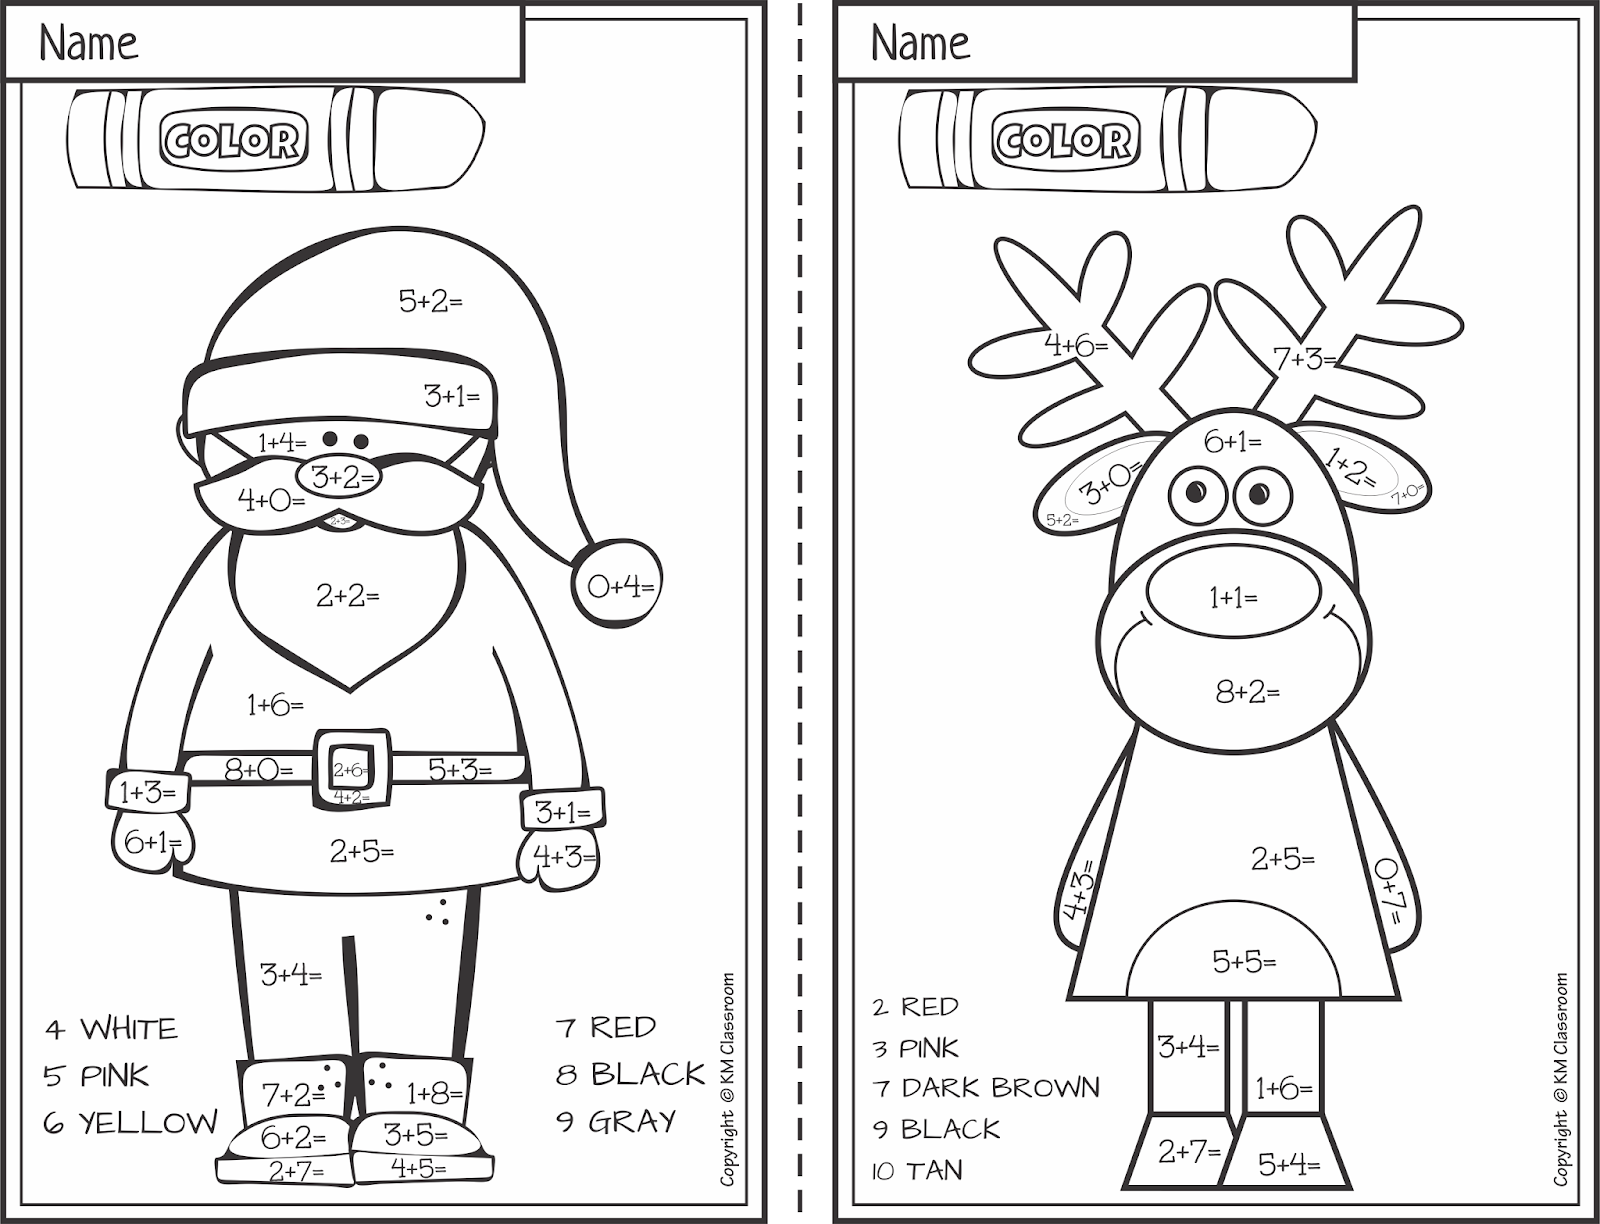 FREE Christmas Color by Number Addition within 10 2